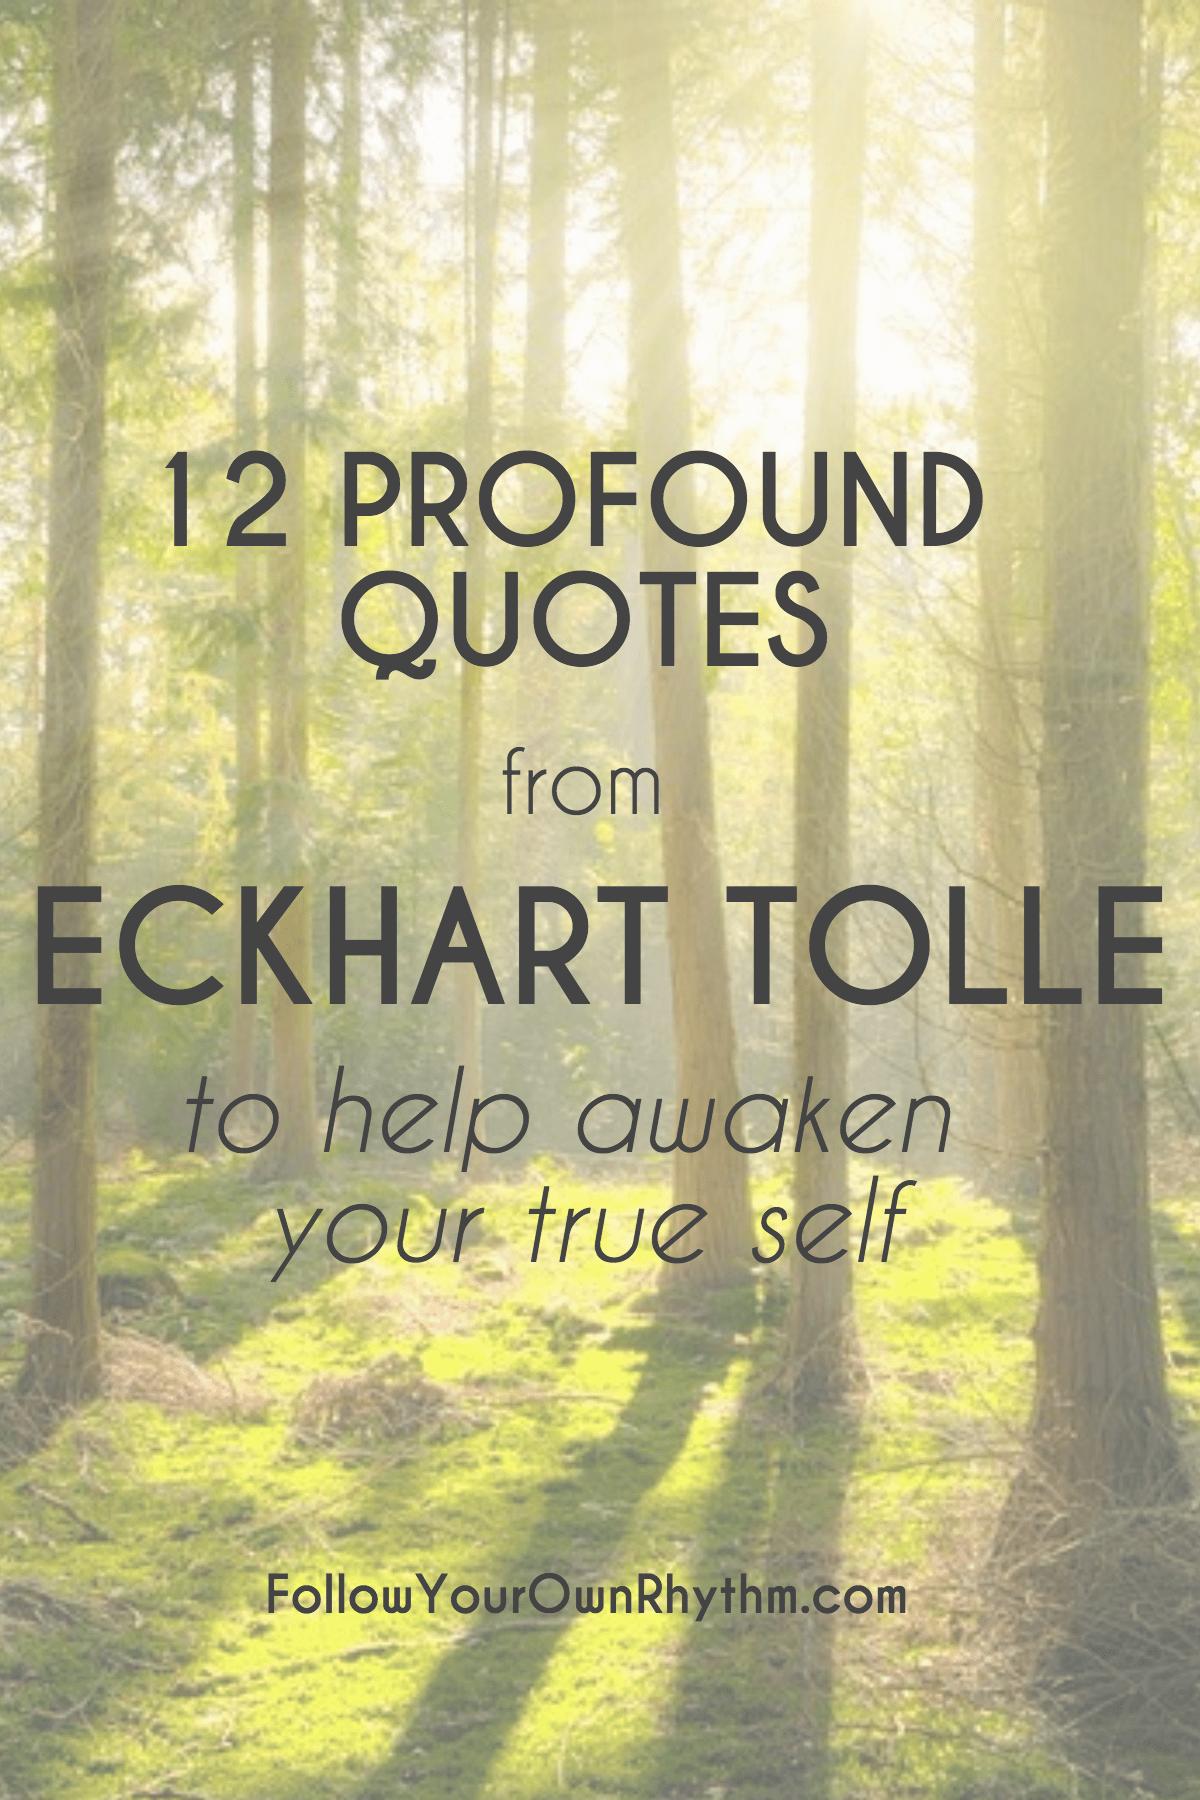 Quotes from Eckhart Tolle to Help Awaken Your True Self — Follow Your Own